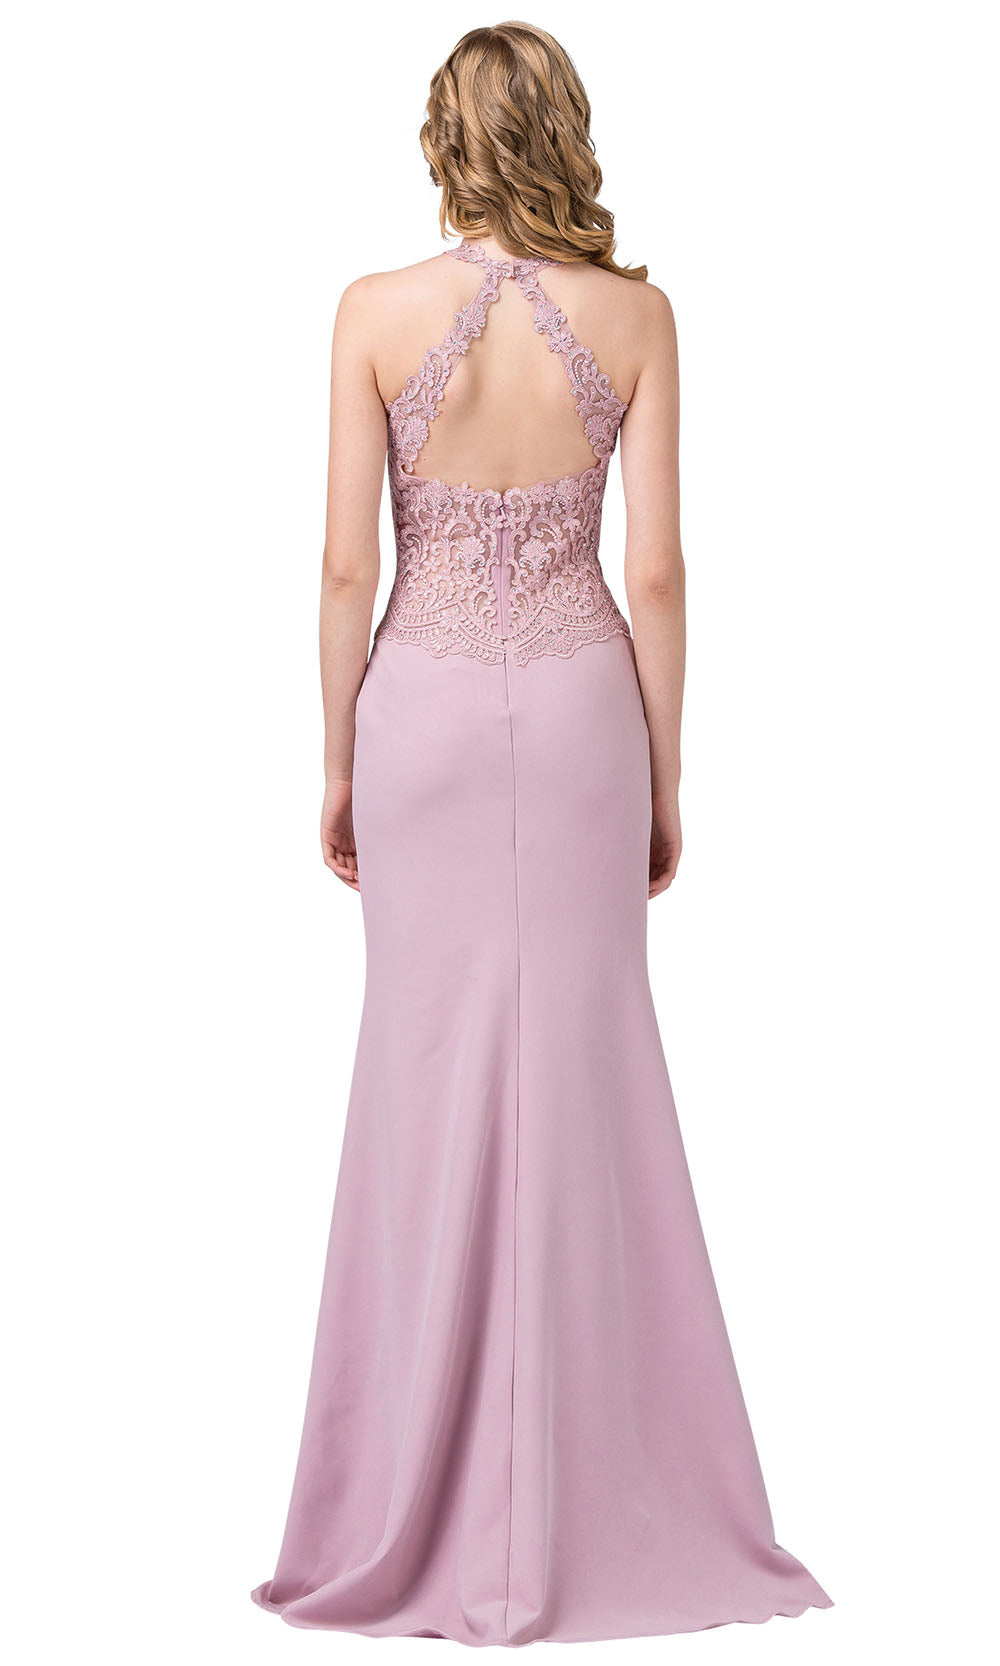 Dancing Queen - 2787 Embroidered Cutout Halter Long Dress In Pink